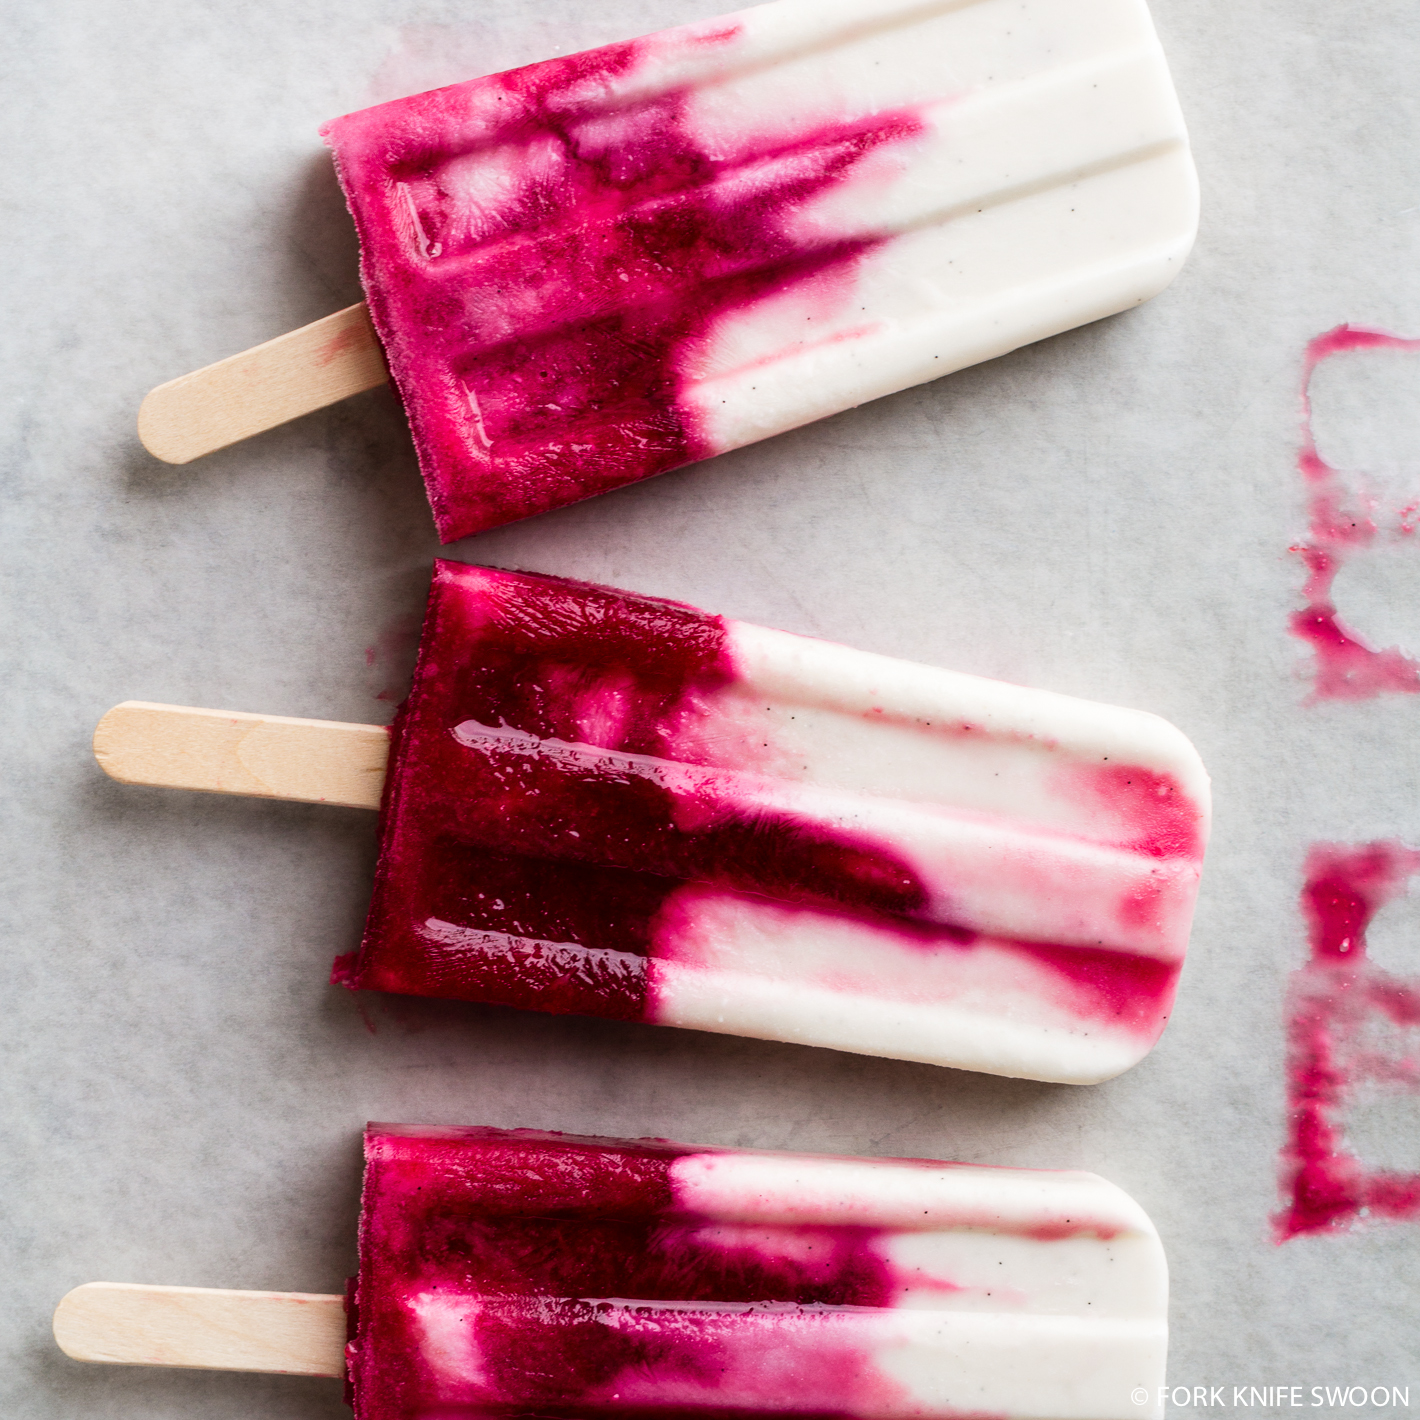 Creamy Coconut and Blood Orange Popsicles